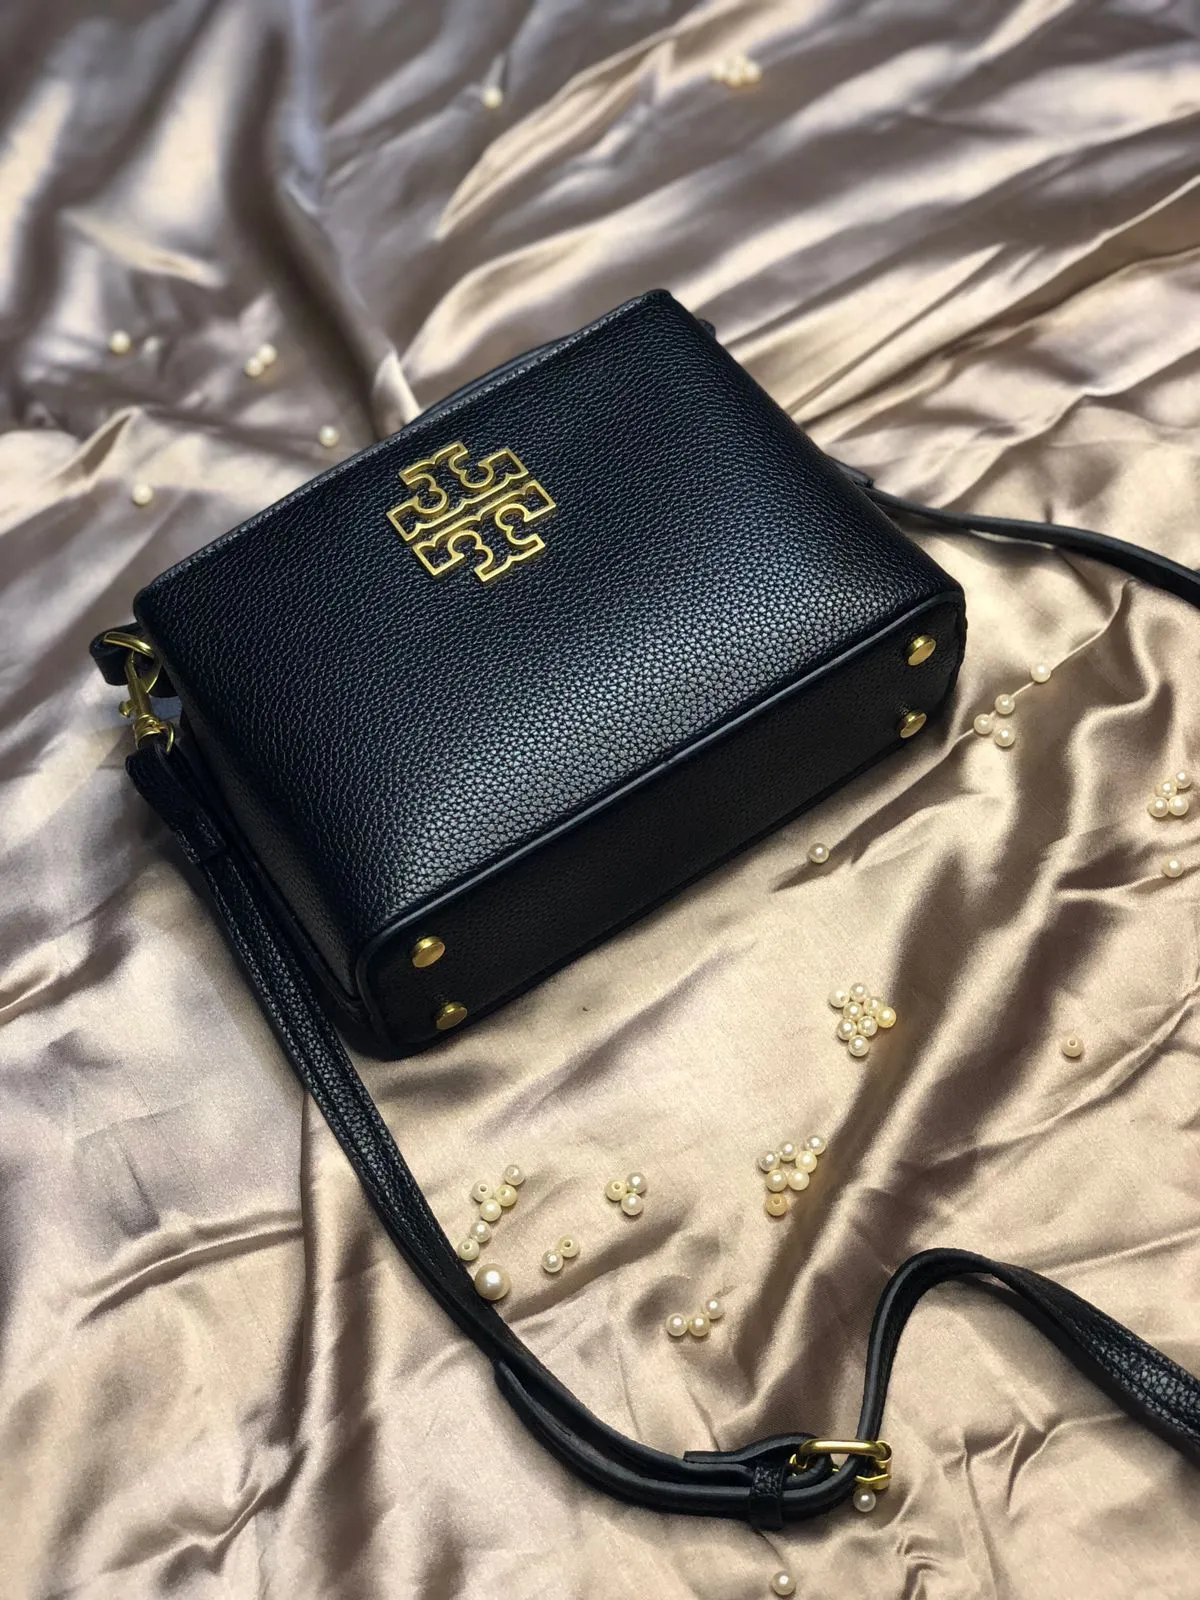 This image shows the Tory Burch Britten Micro Satchel (Black). sale on this website. #womensbag #imported #ladiesbag #bag #ToryBurchbag #mediumsizebag.